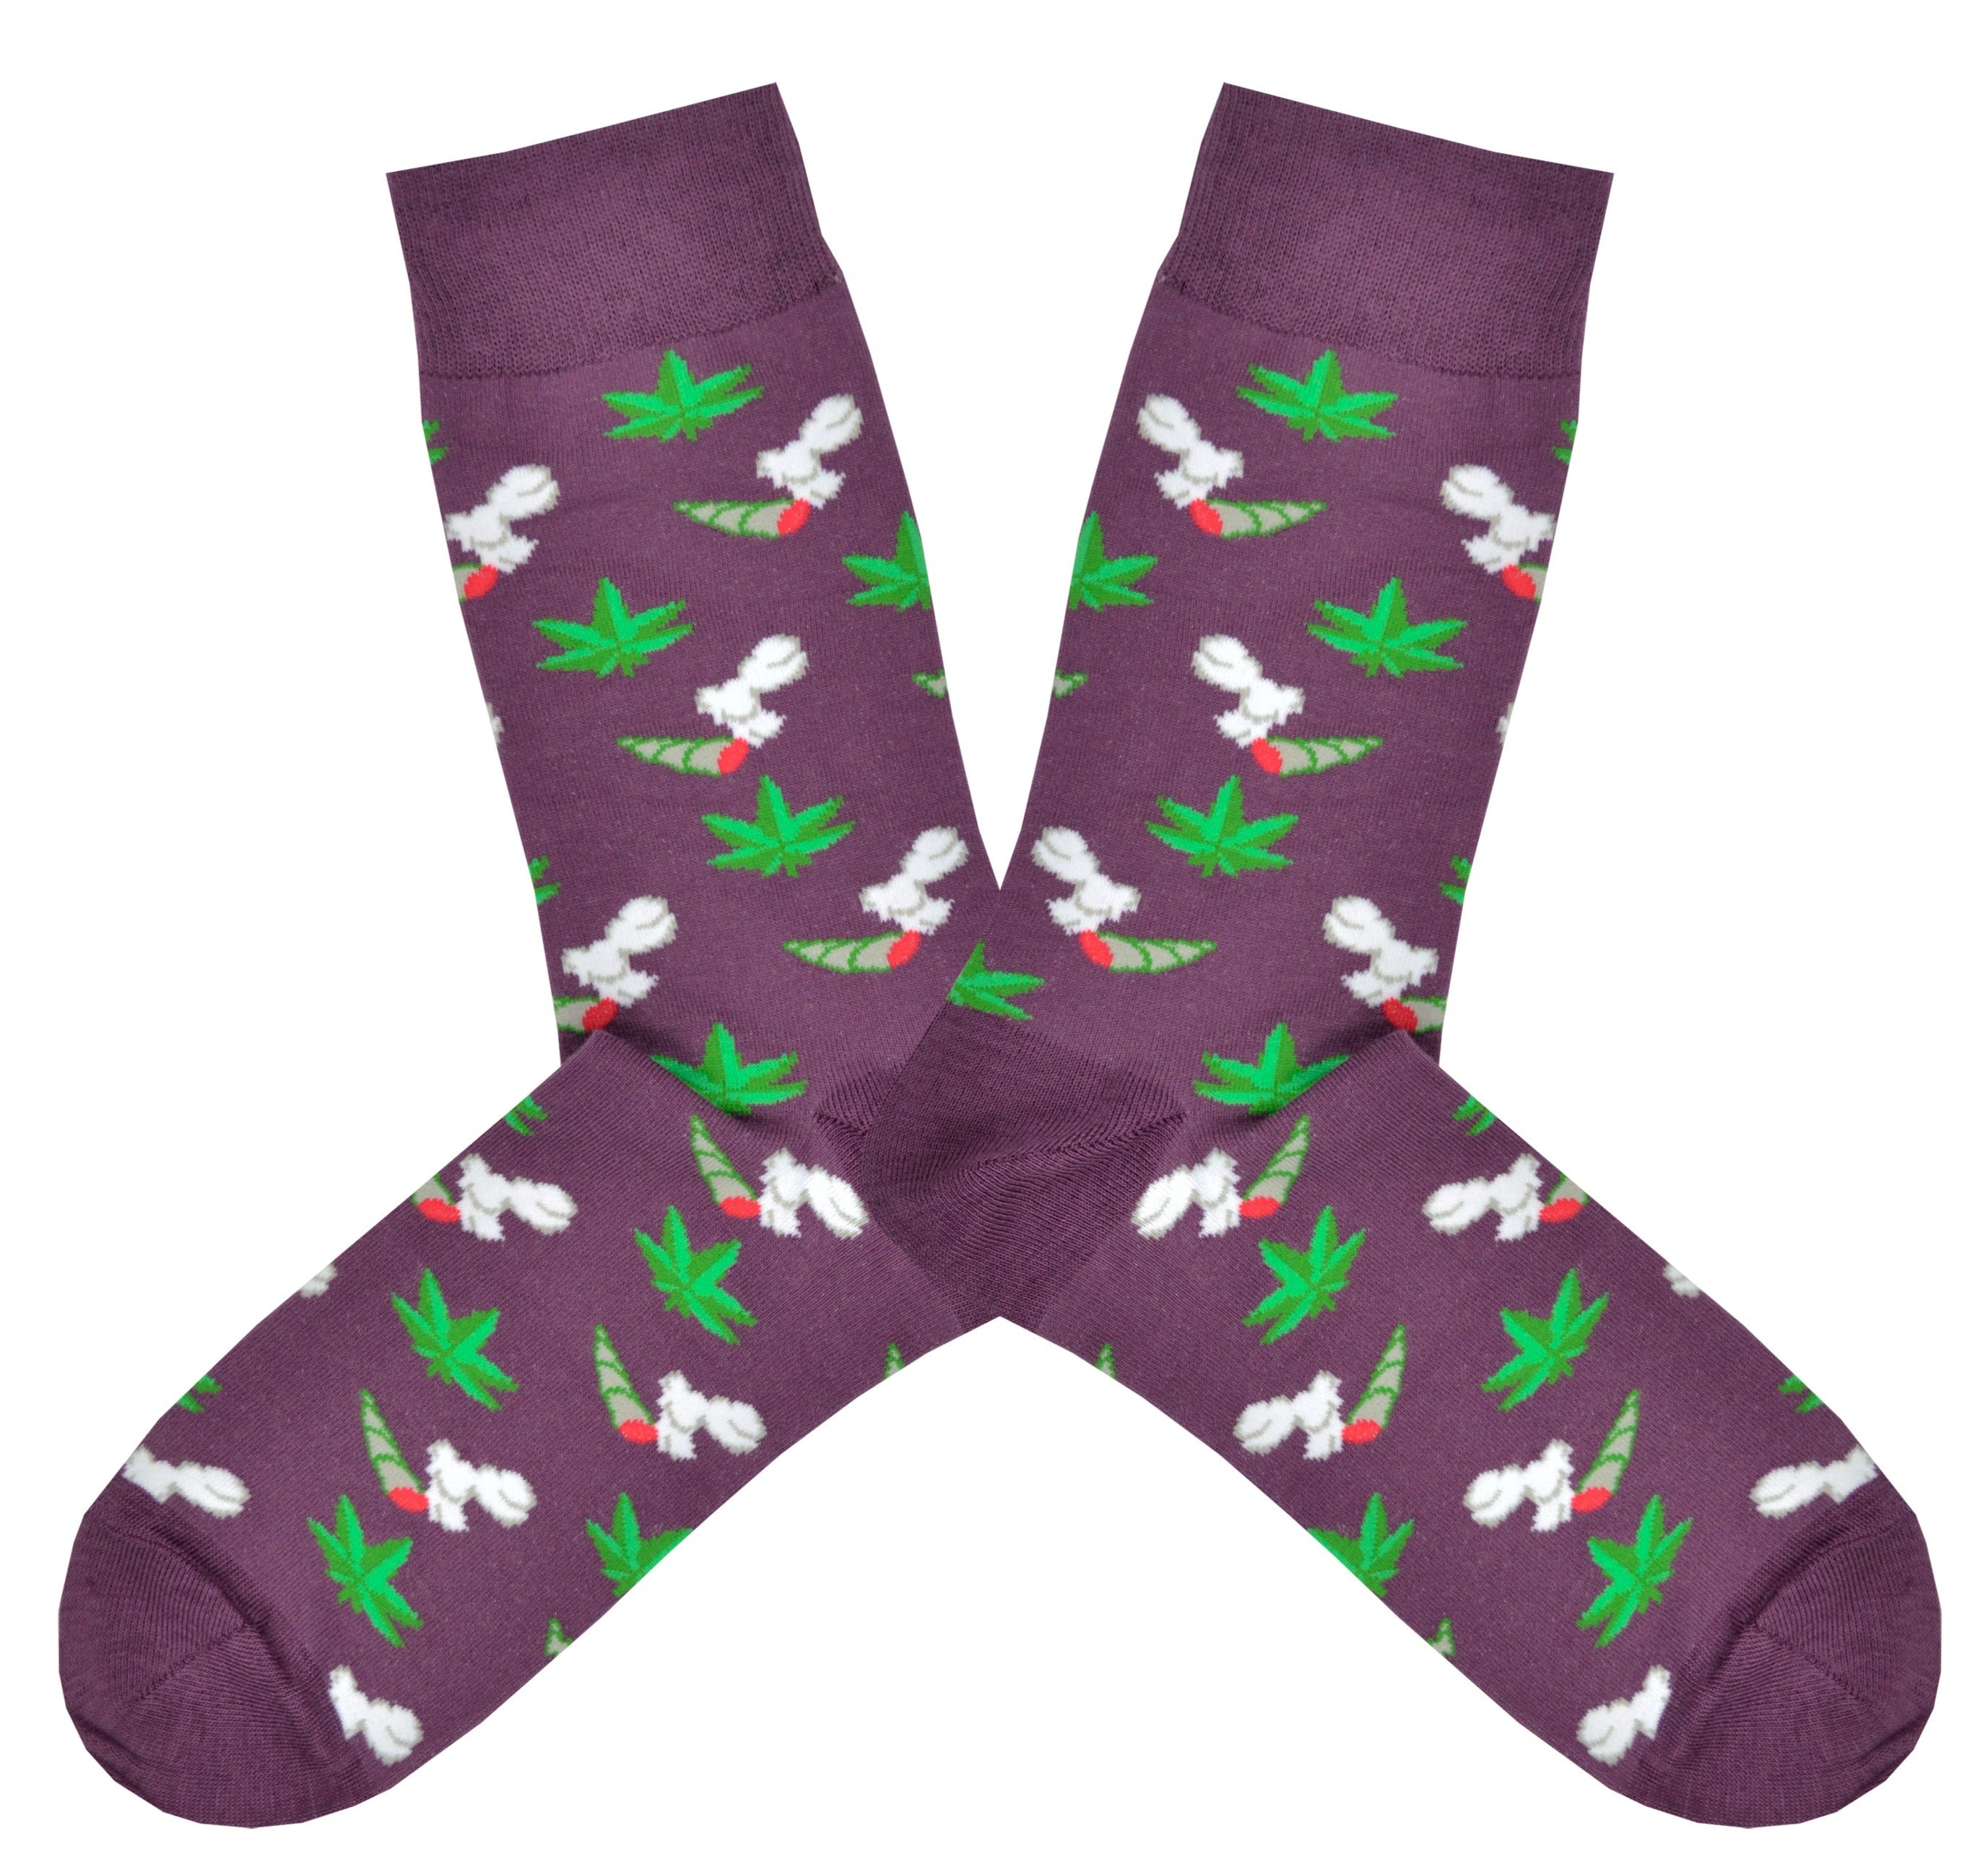 Shown in a flatlay, a pair of Yellow Owl Workshop men's nylon and cotton crew socks in purple with an all over design of green marijuana plants and smoking joints.